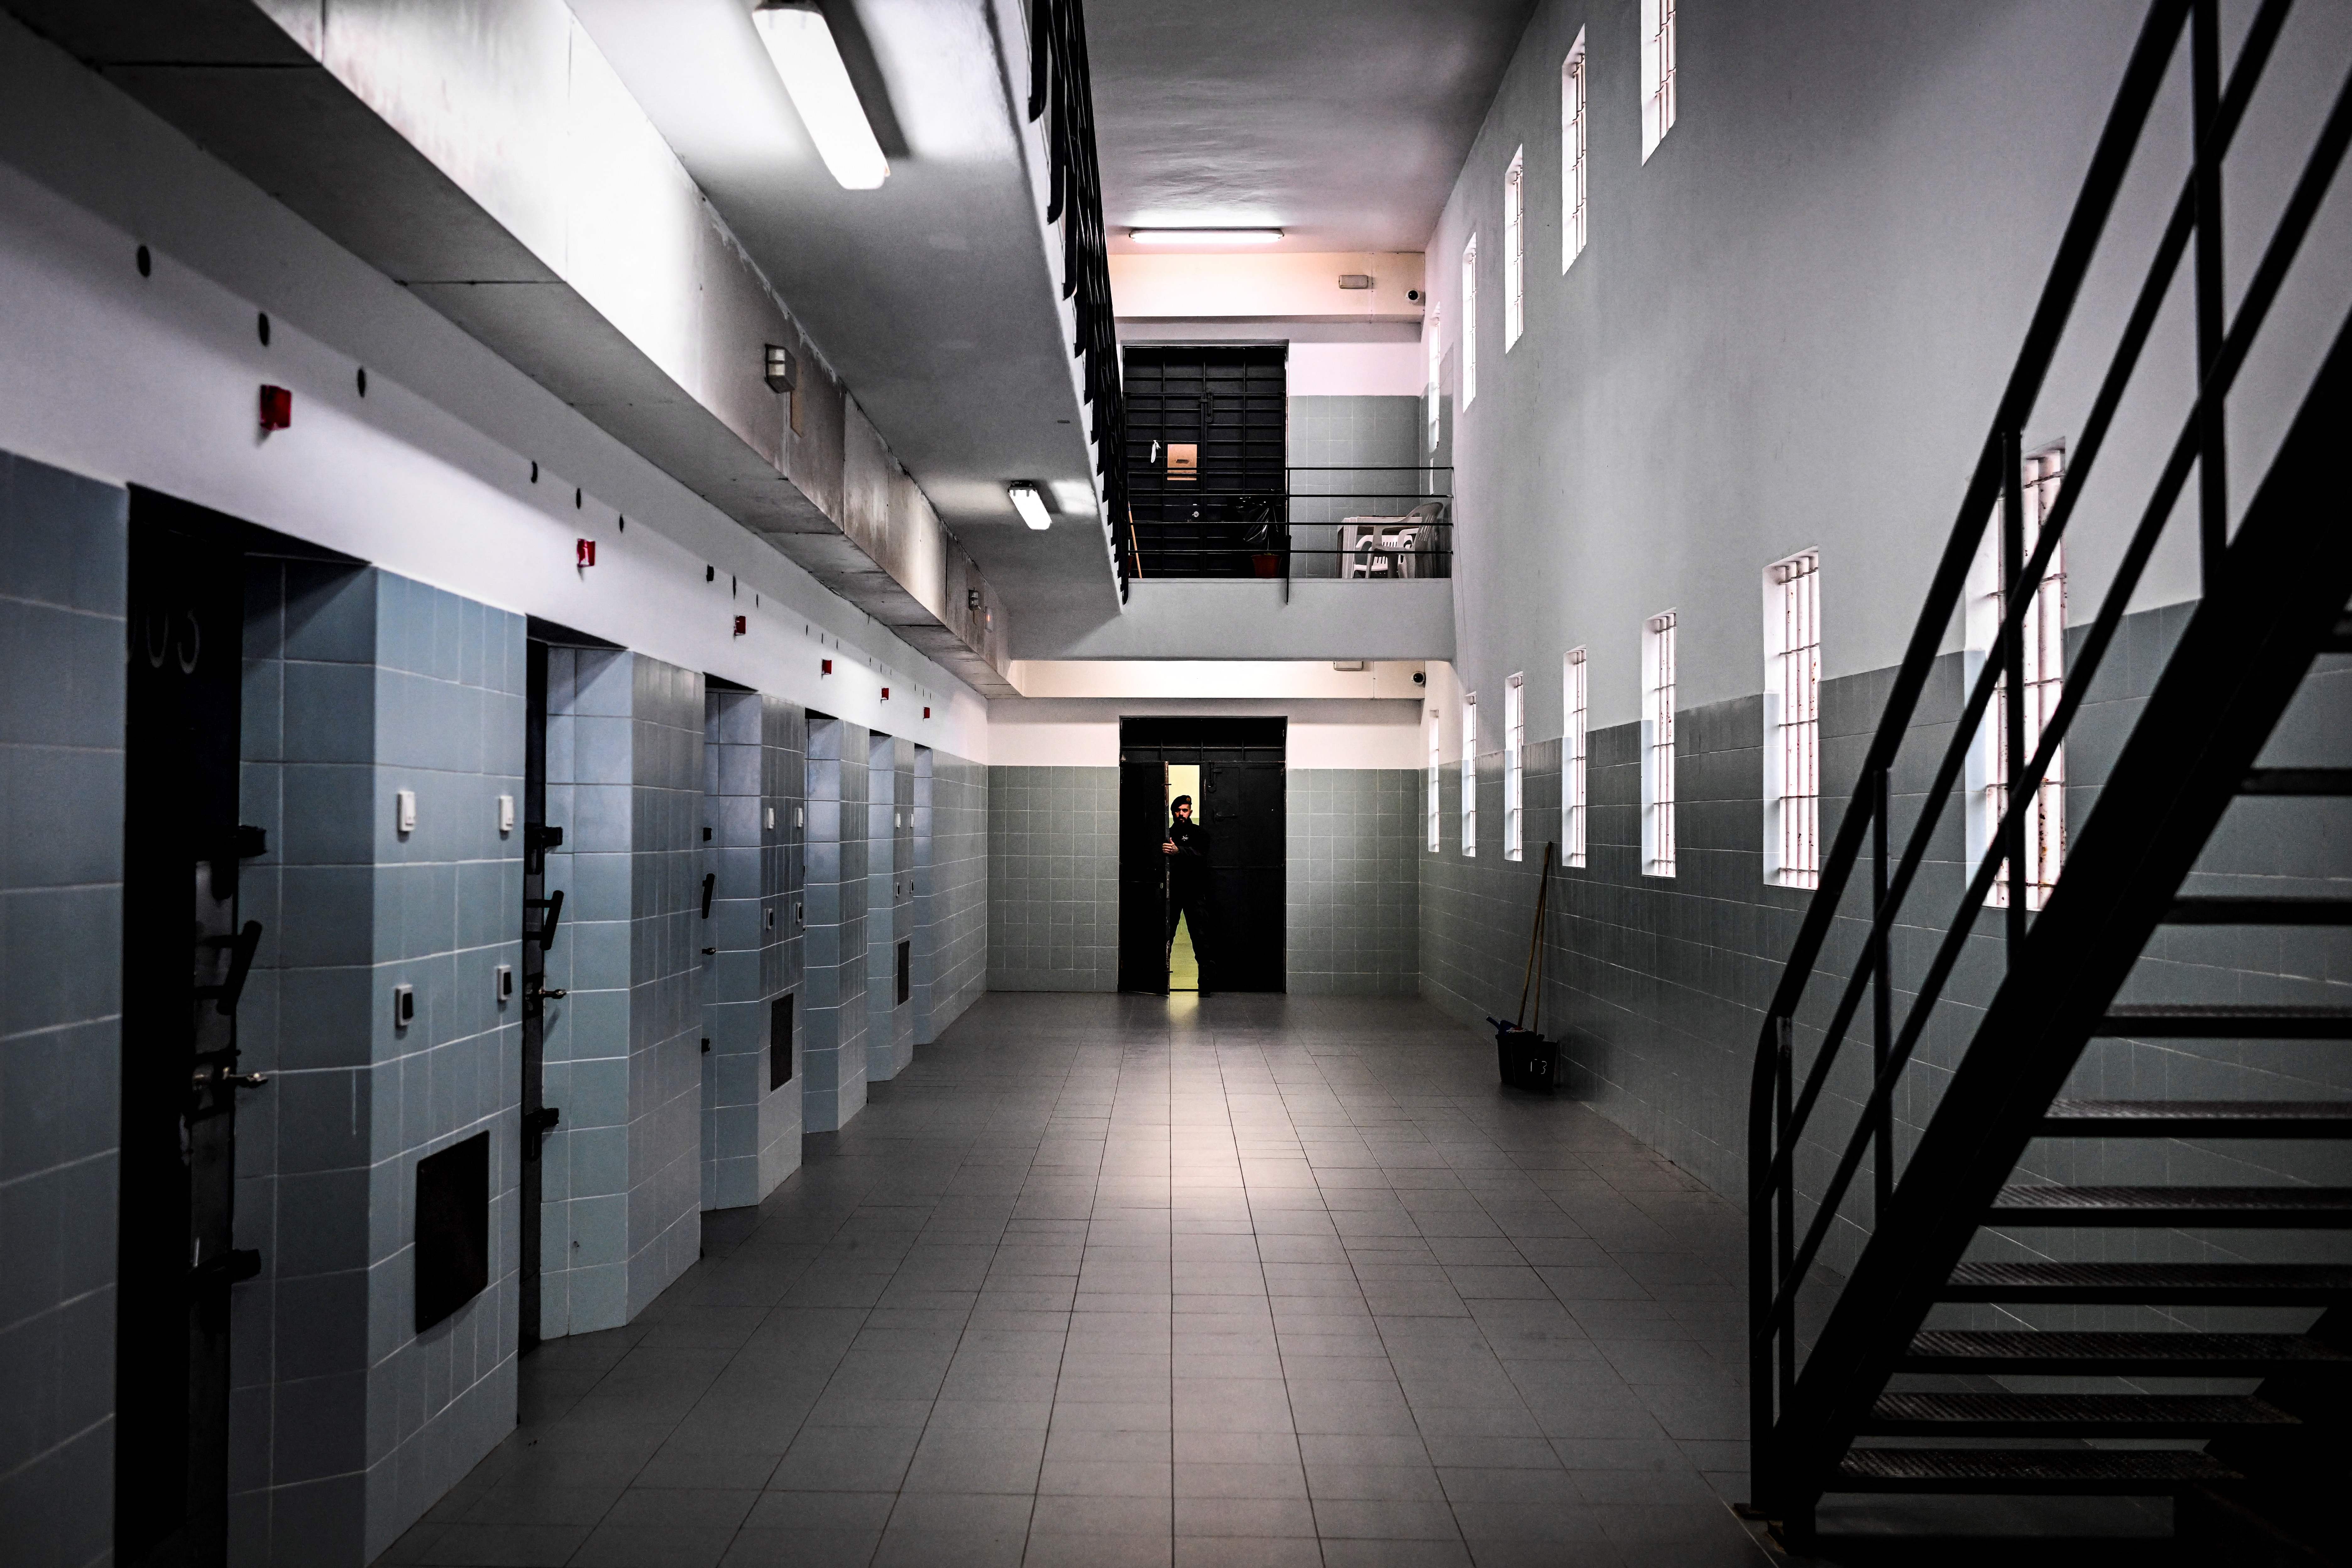 A prison guard stands near the prison cells at Linho prison in Alcabideche, near Cascais on October 31, 2022. - 16 inmates from Linho Prison take part in the project which started in May 2019, developed by Catarina Camara, a 42 years old dancer of Companhia Olga Roriz, trained in Gestalt therapy. (Photo by PATRICIA DE MELO MOREIRA / AFP) (Photo by PATRICIA DE MELO MOREIRA/AFP via Getty Images)